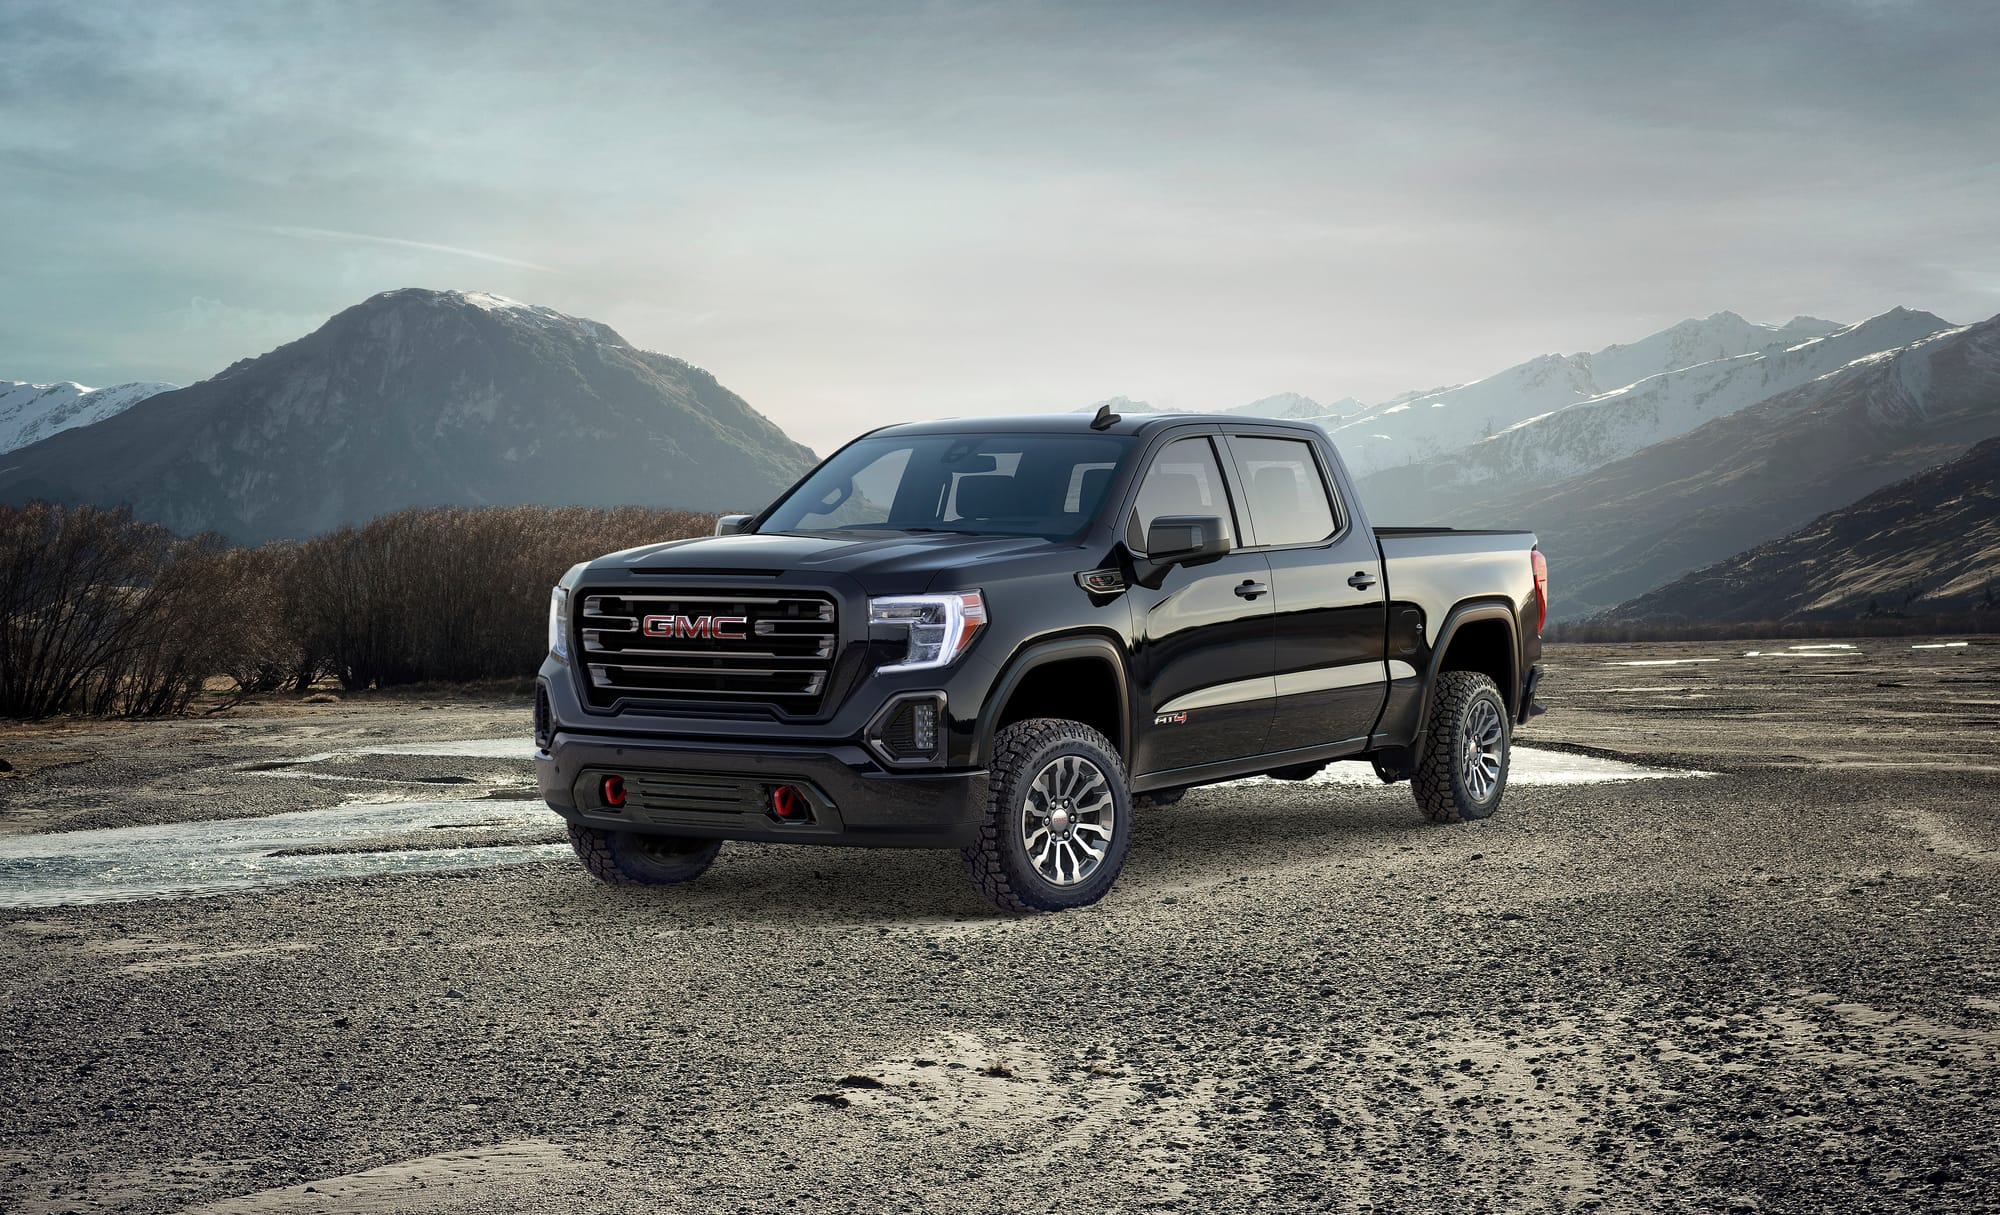 2021 Vehicles with the Highest Resale Value: Hold Onto Your Horses (and Trucks)!